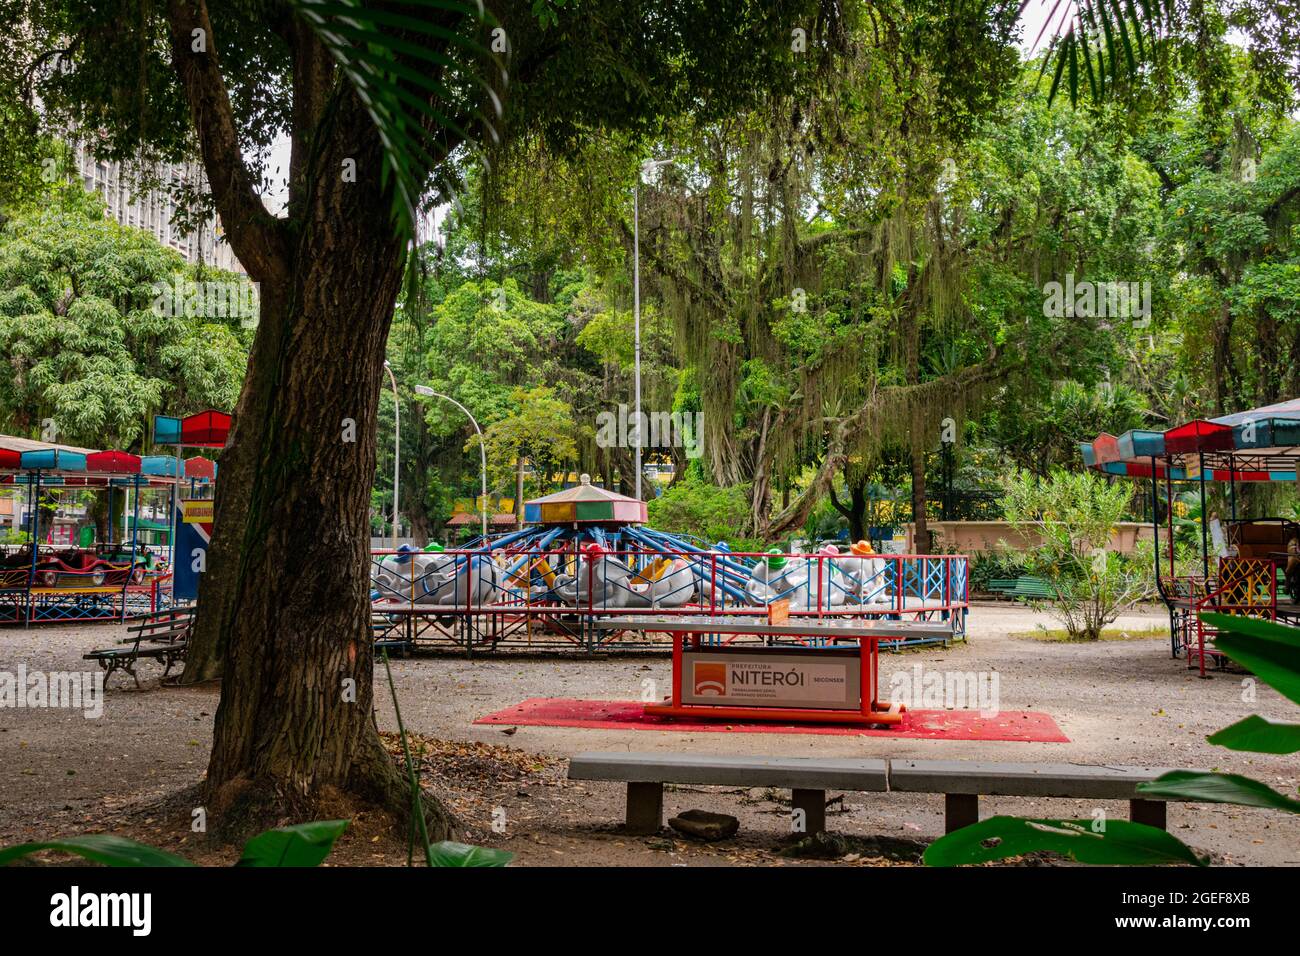 Urban public park, known as “Campo de São Bento”, closed and without people due to the lockdown decreed during the COVID-19 pandemic Stock Photo